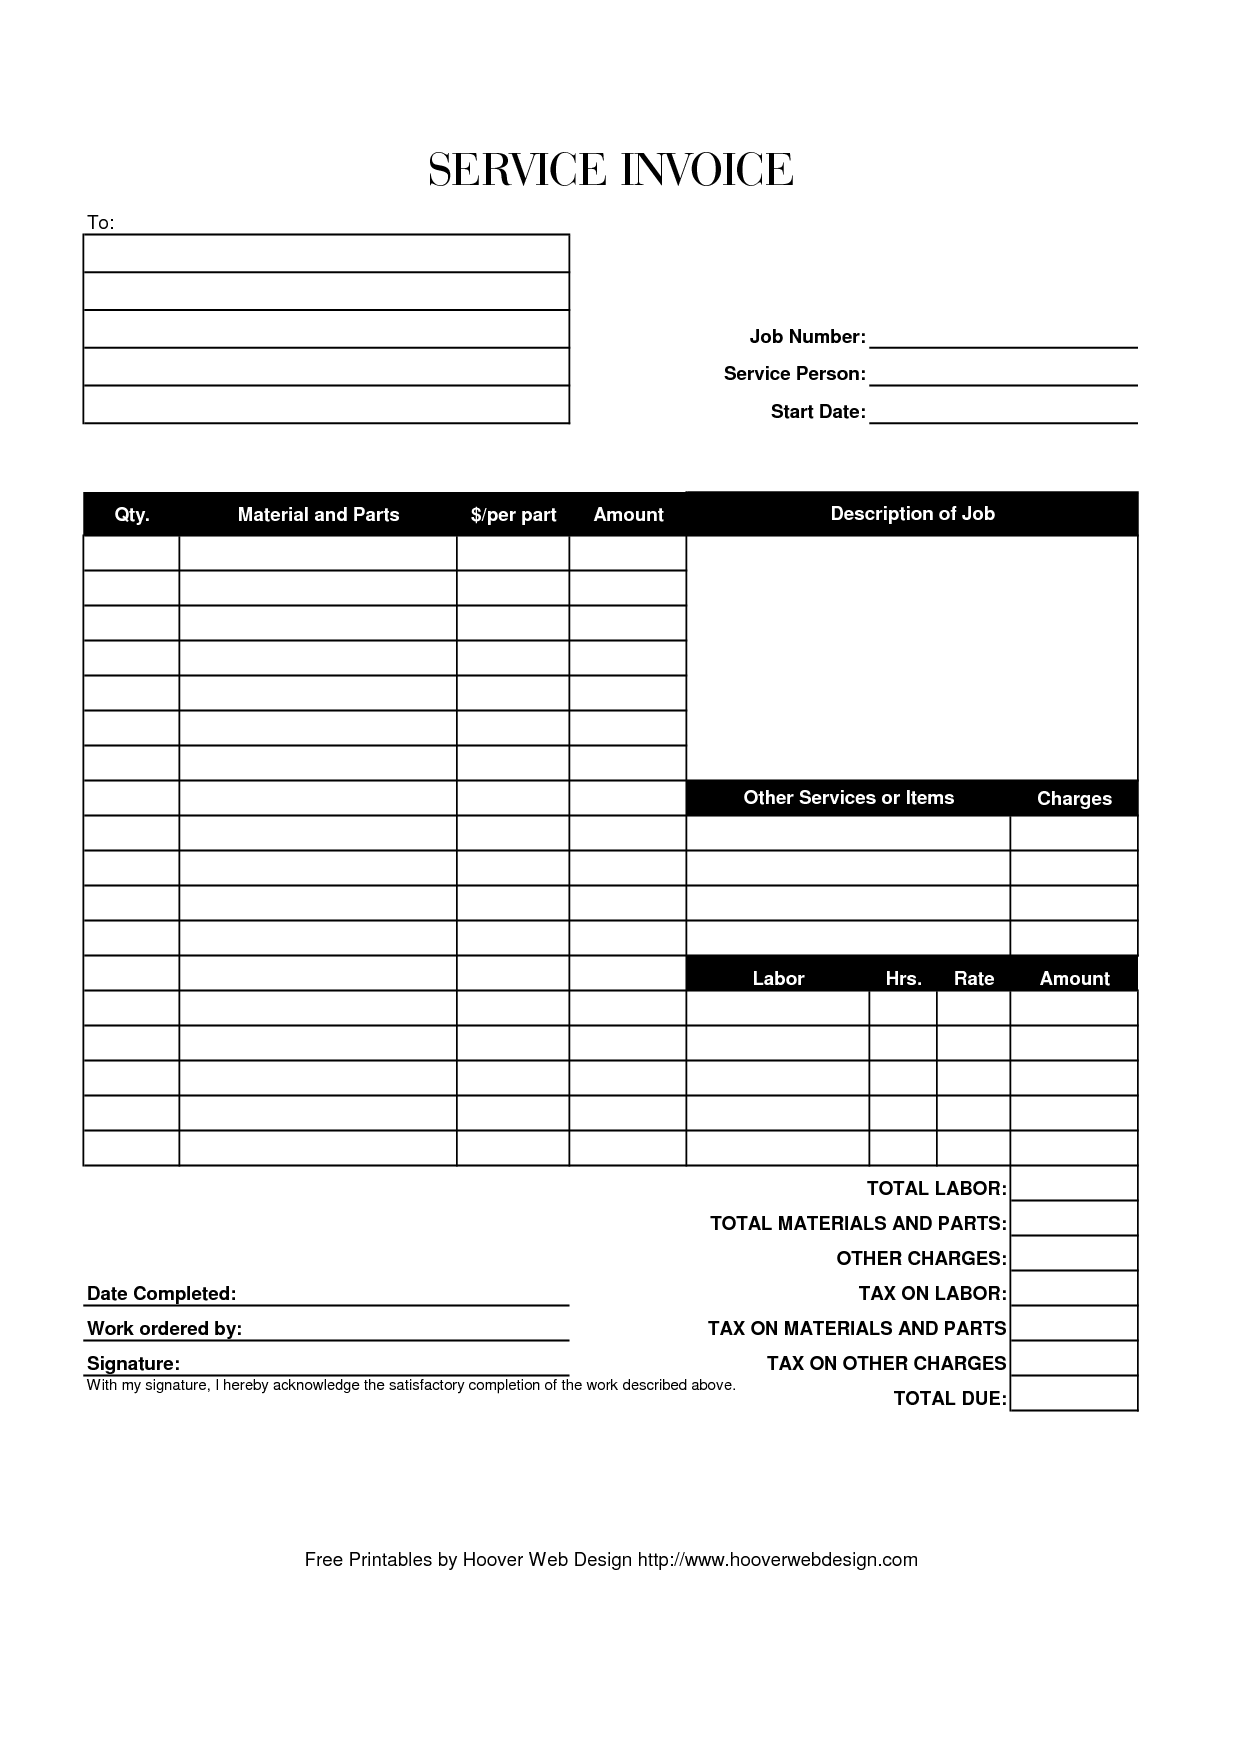 Image result for free invoice template pdf | lajet bang 